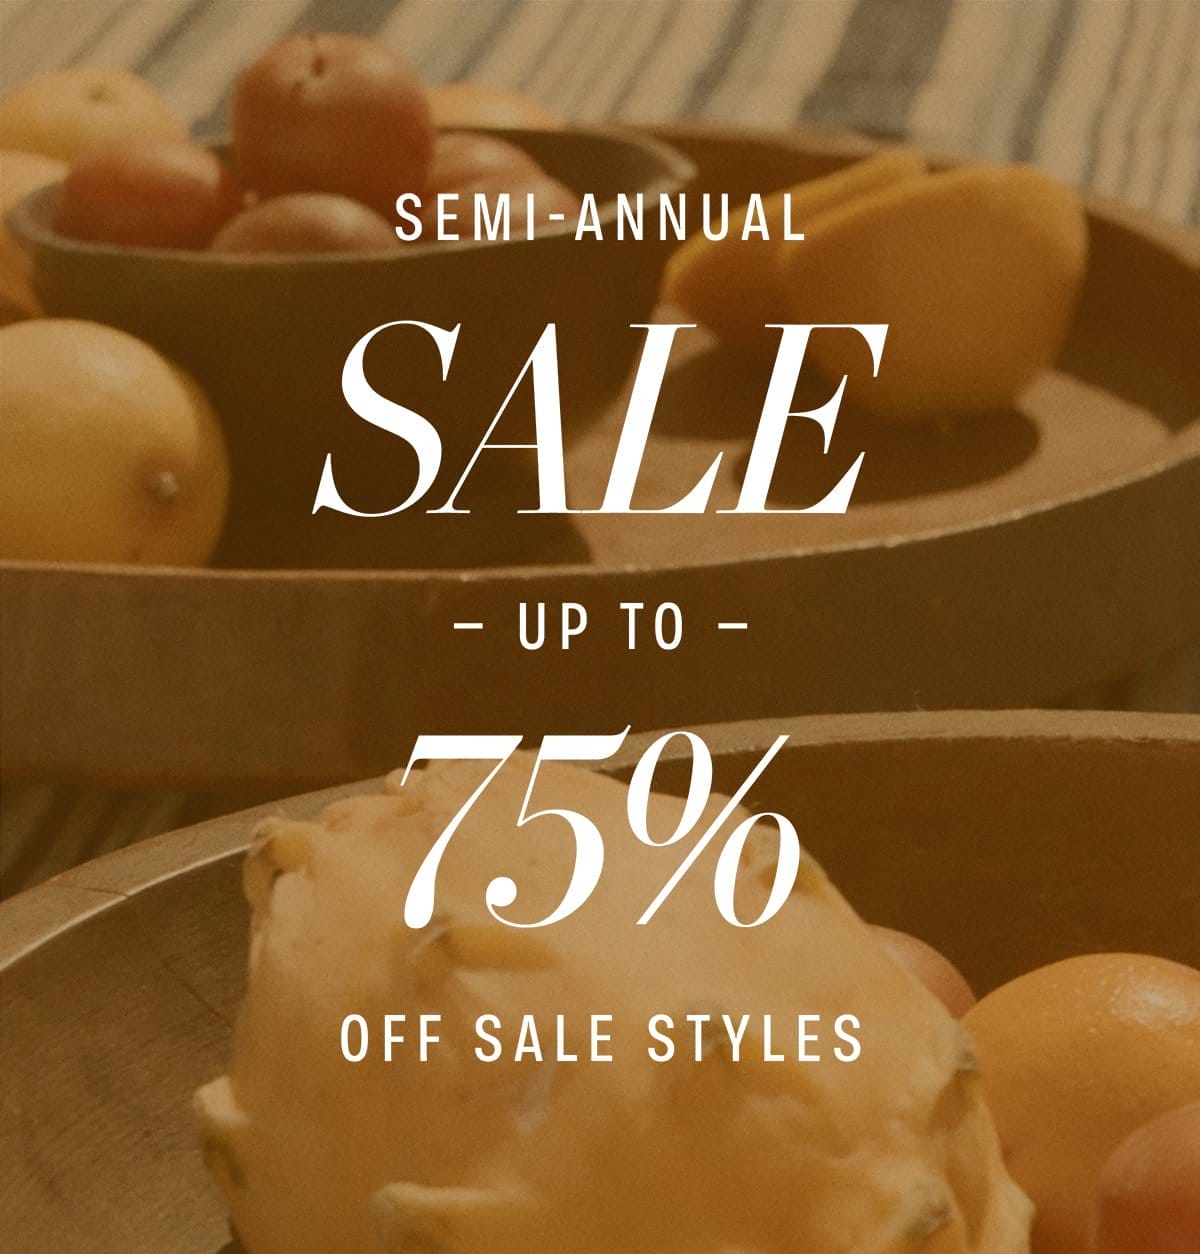 SEMI-ANNUAL SALE. UP TO 75% OFF SALE STYLES